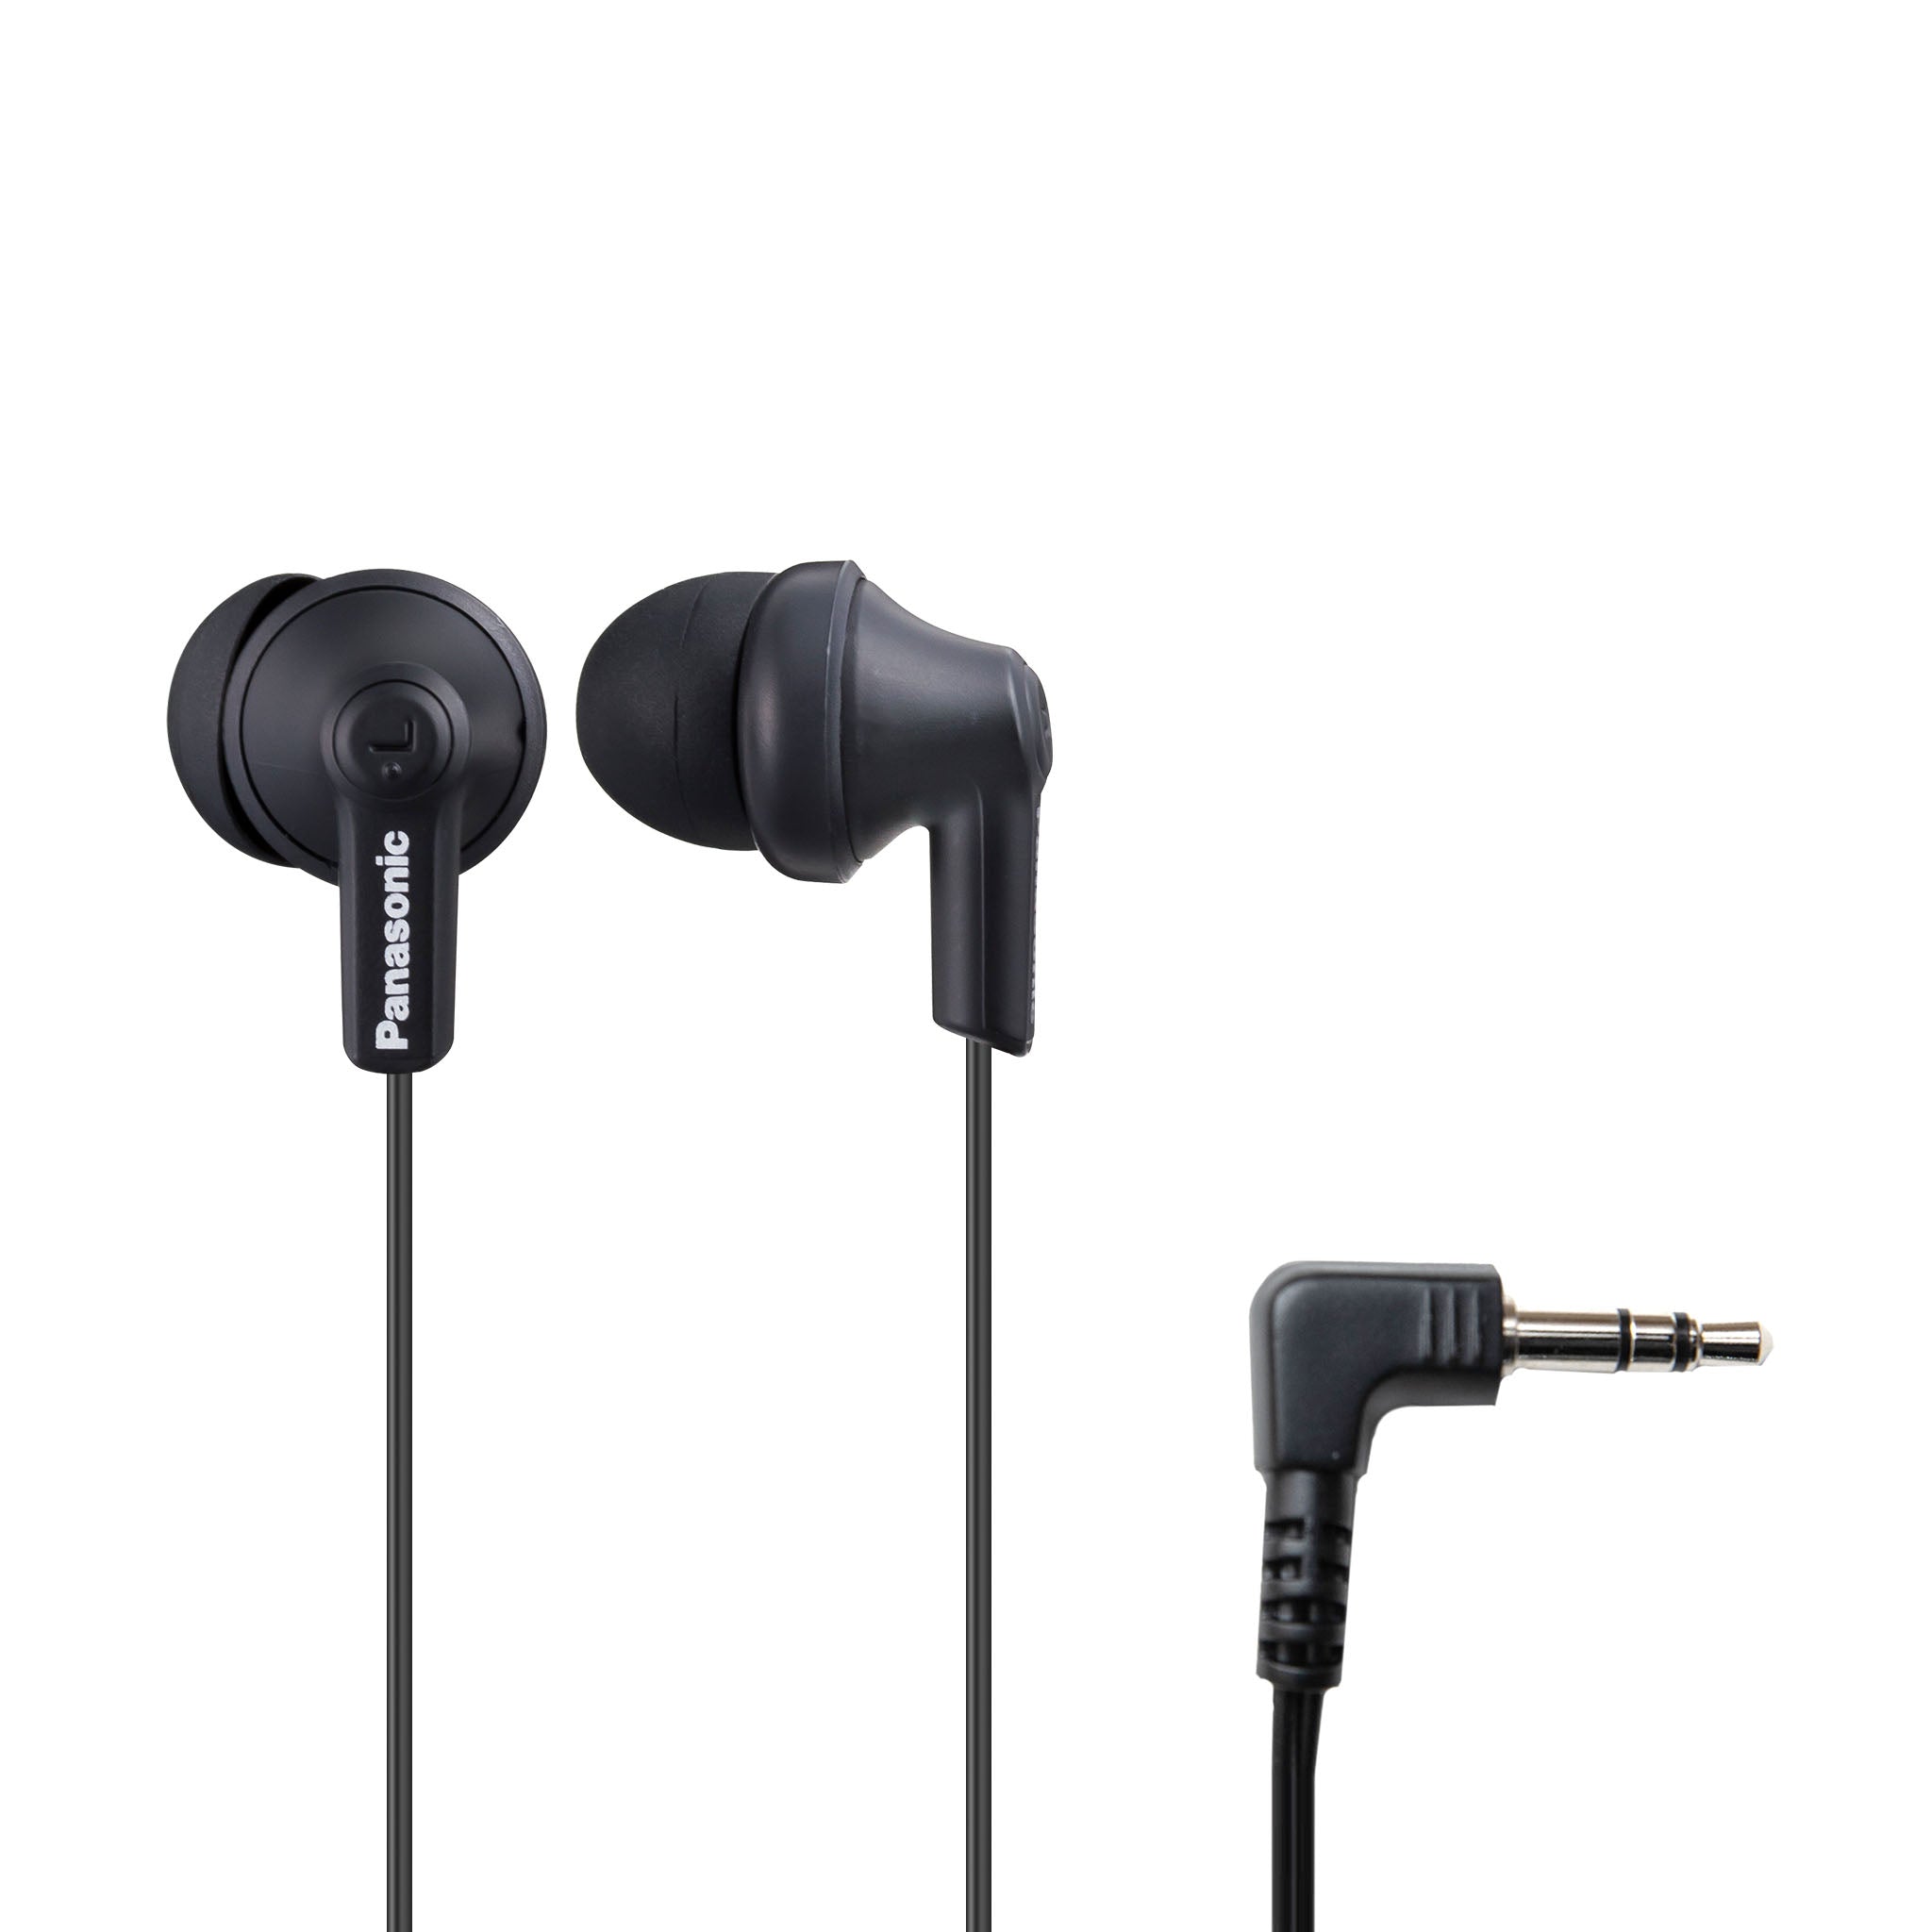 Panasonic ErgoFit In-Ear Earbud Headphones Phones - RP-HJE120 with for Laptops Jack 3.5mm and